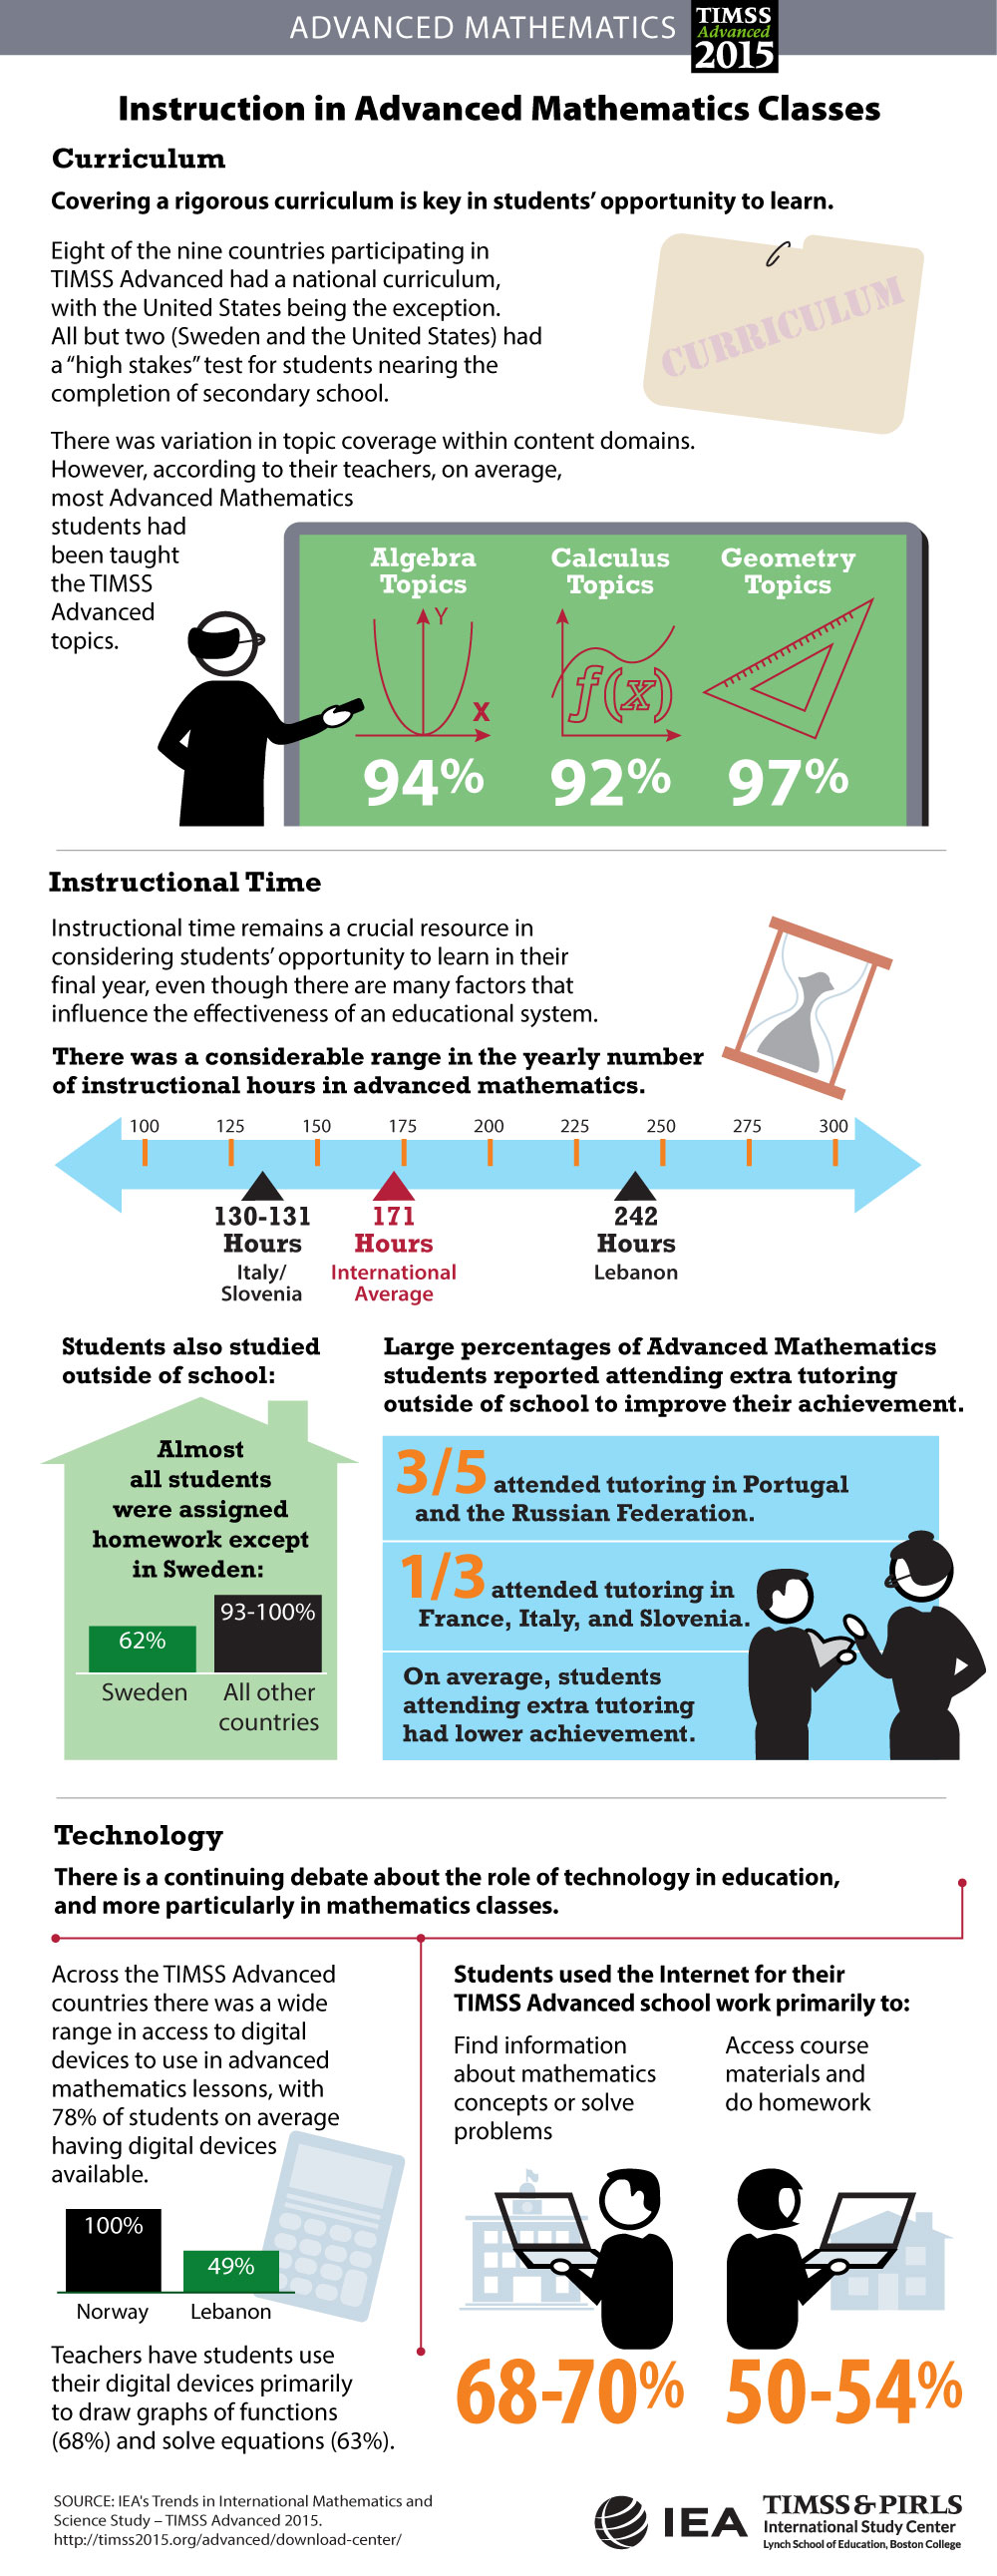 Classroom Instruction Infographic